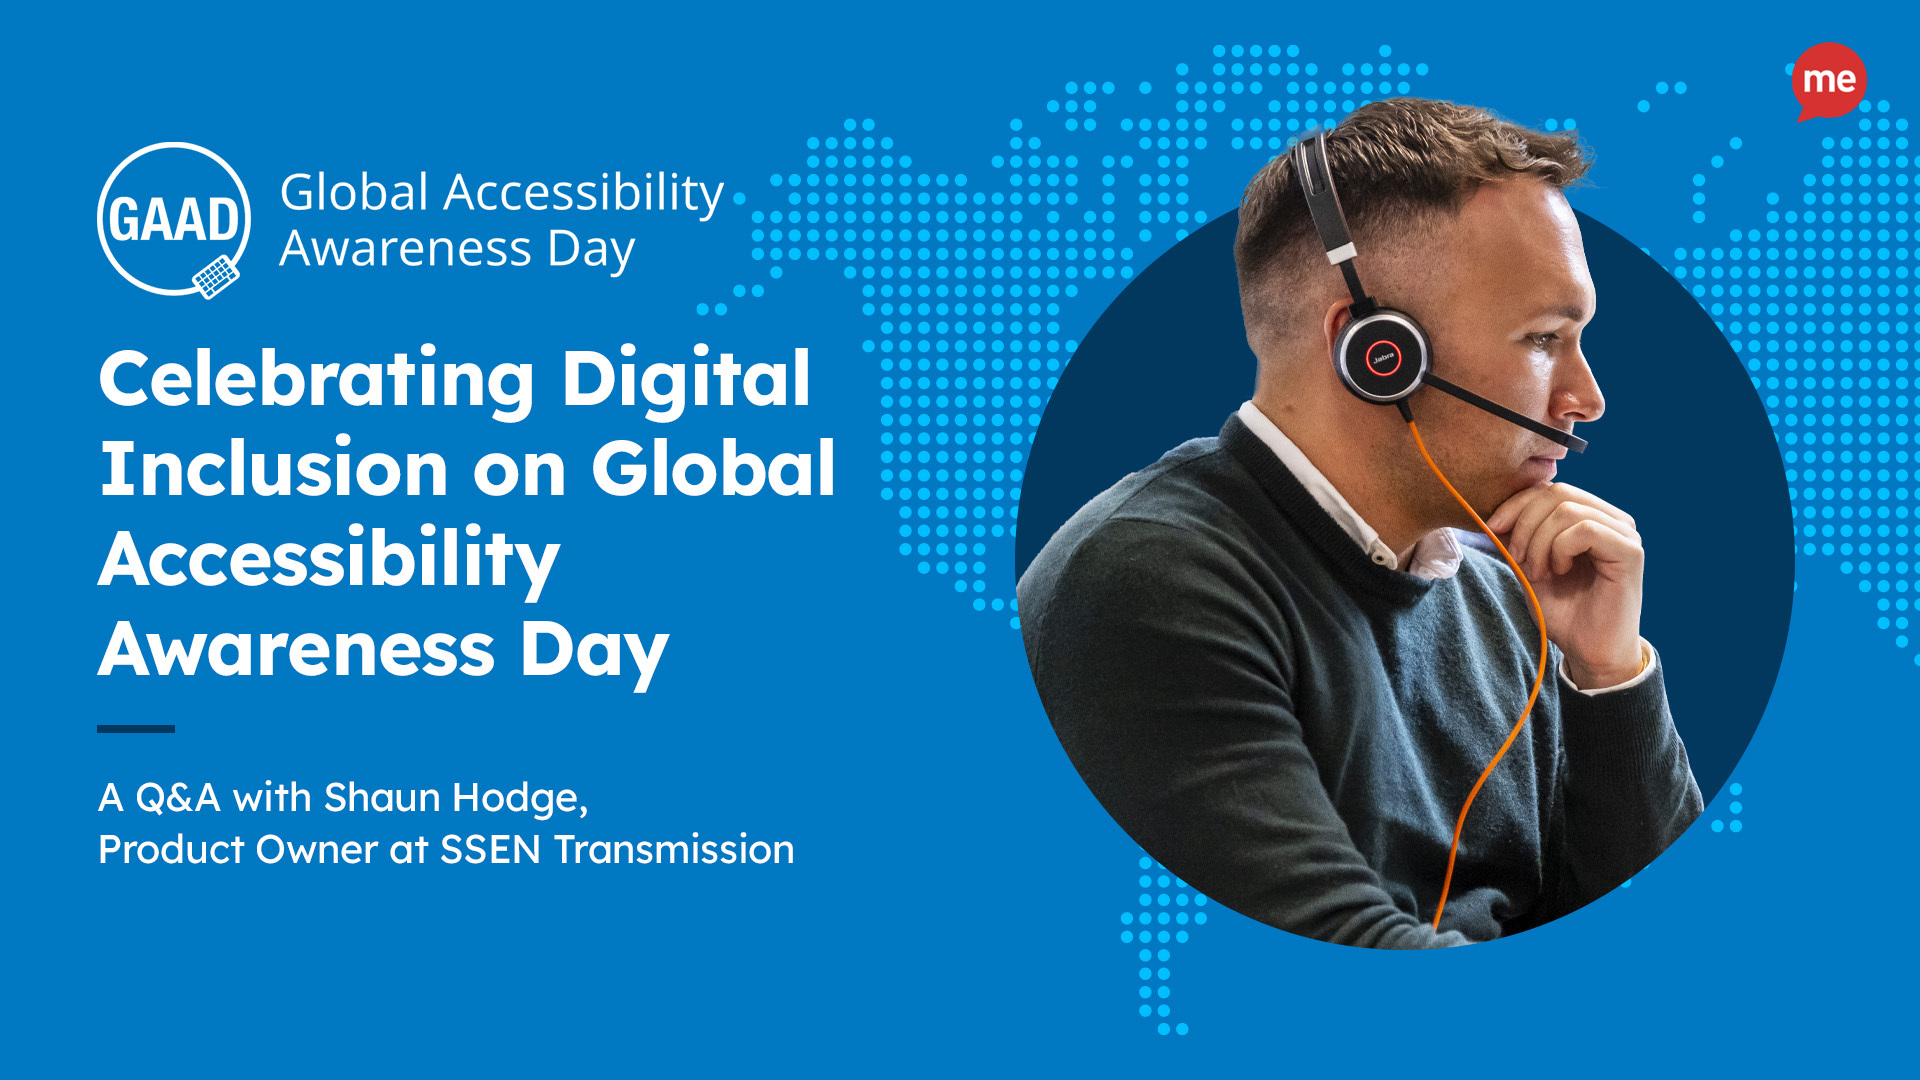 Celebrating Digital Inclusion on Global Accessibility Awareness Day. A Q&A with Shaun Hodge